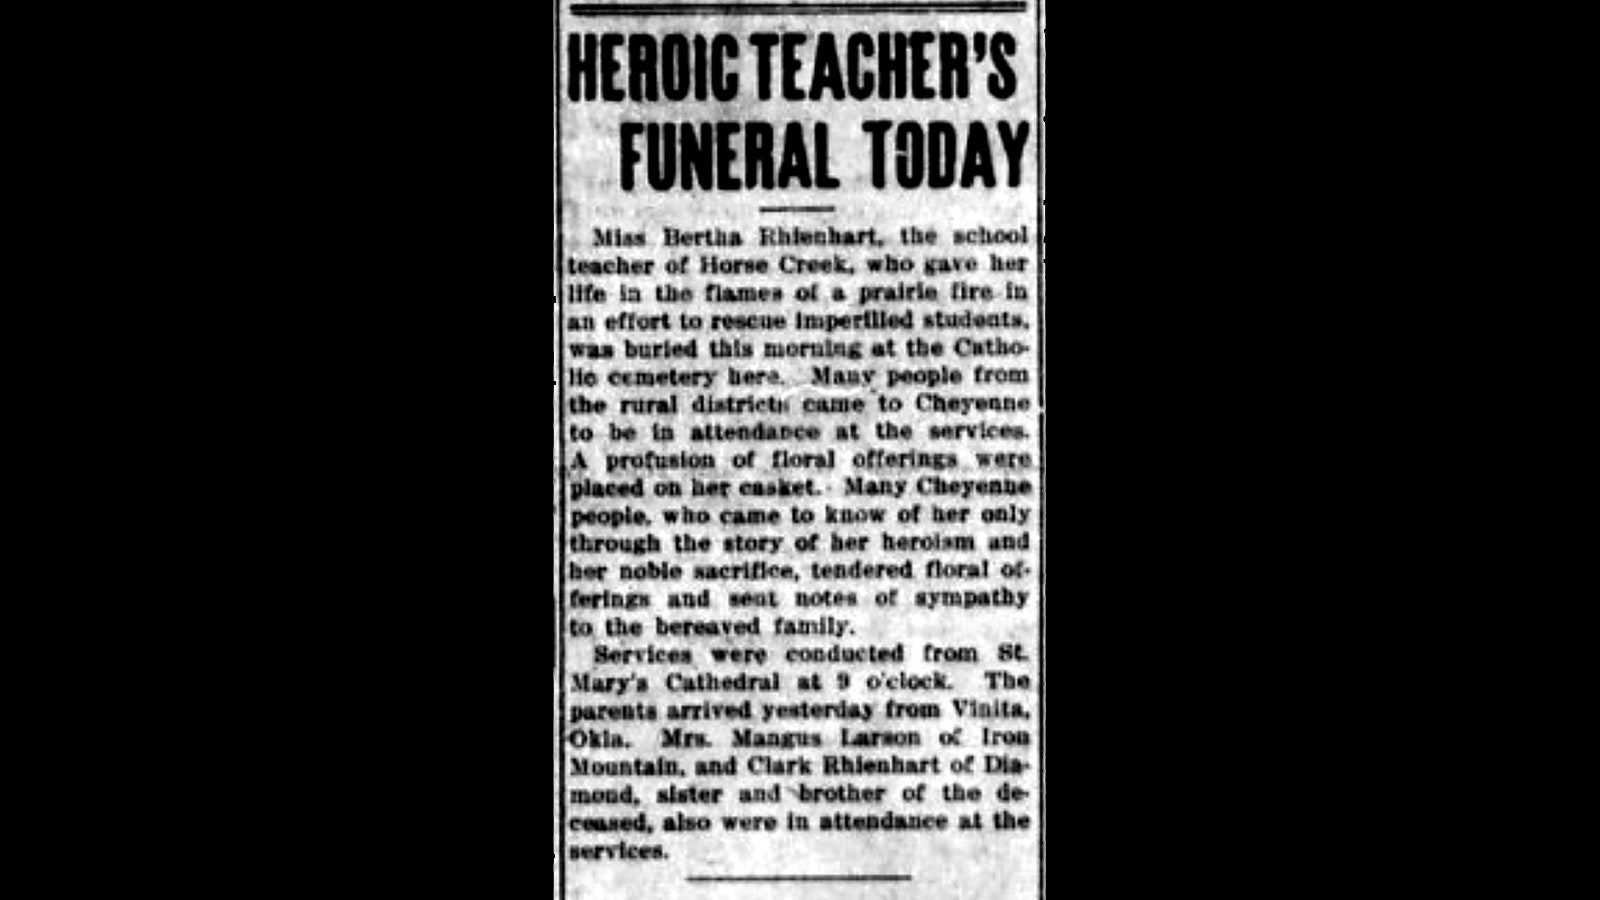 The Wyoming Tribune carried a follow-up story on Nov. 23, 1914, about the brave teacher’s funeral.